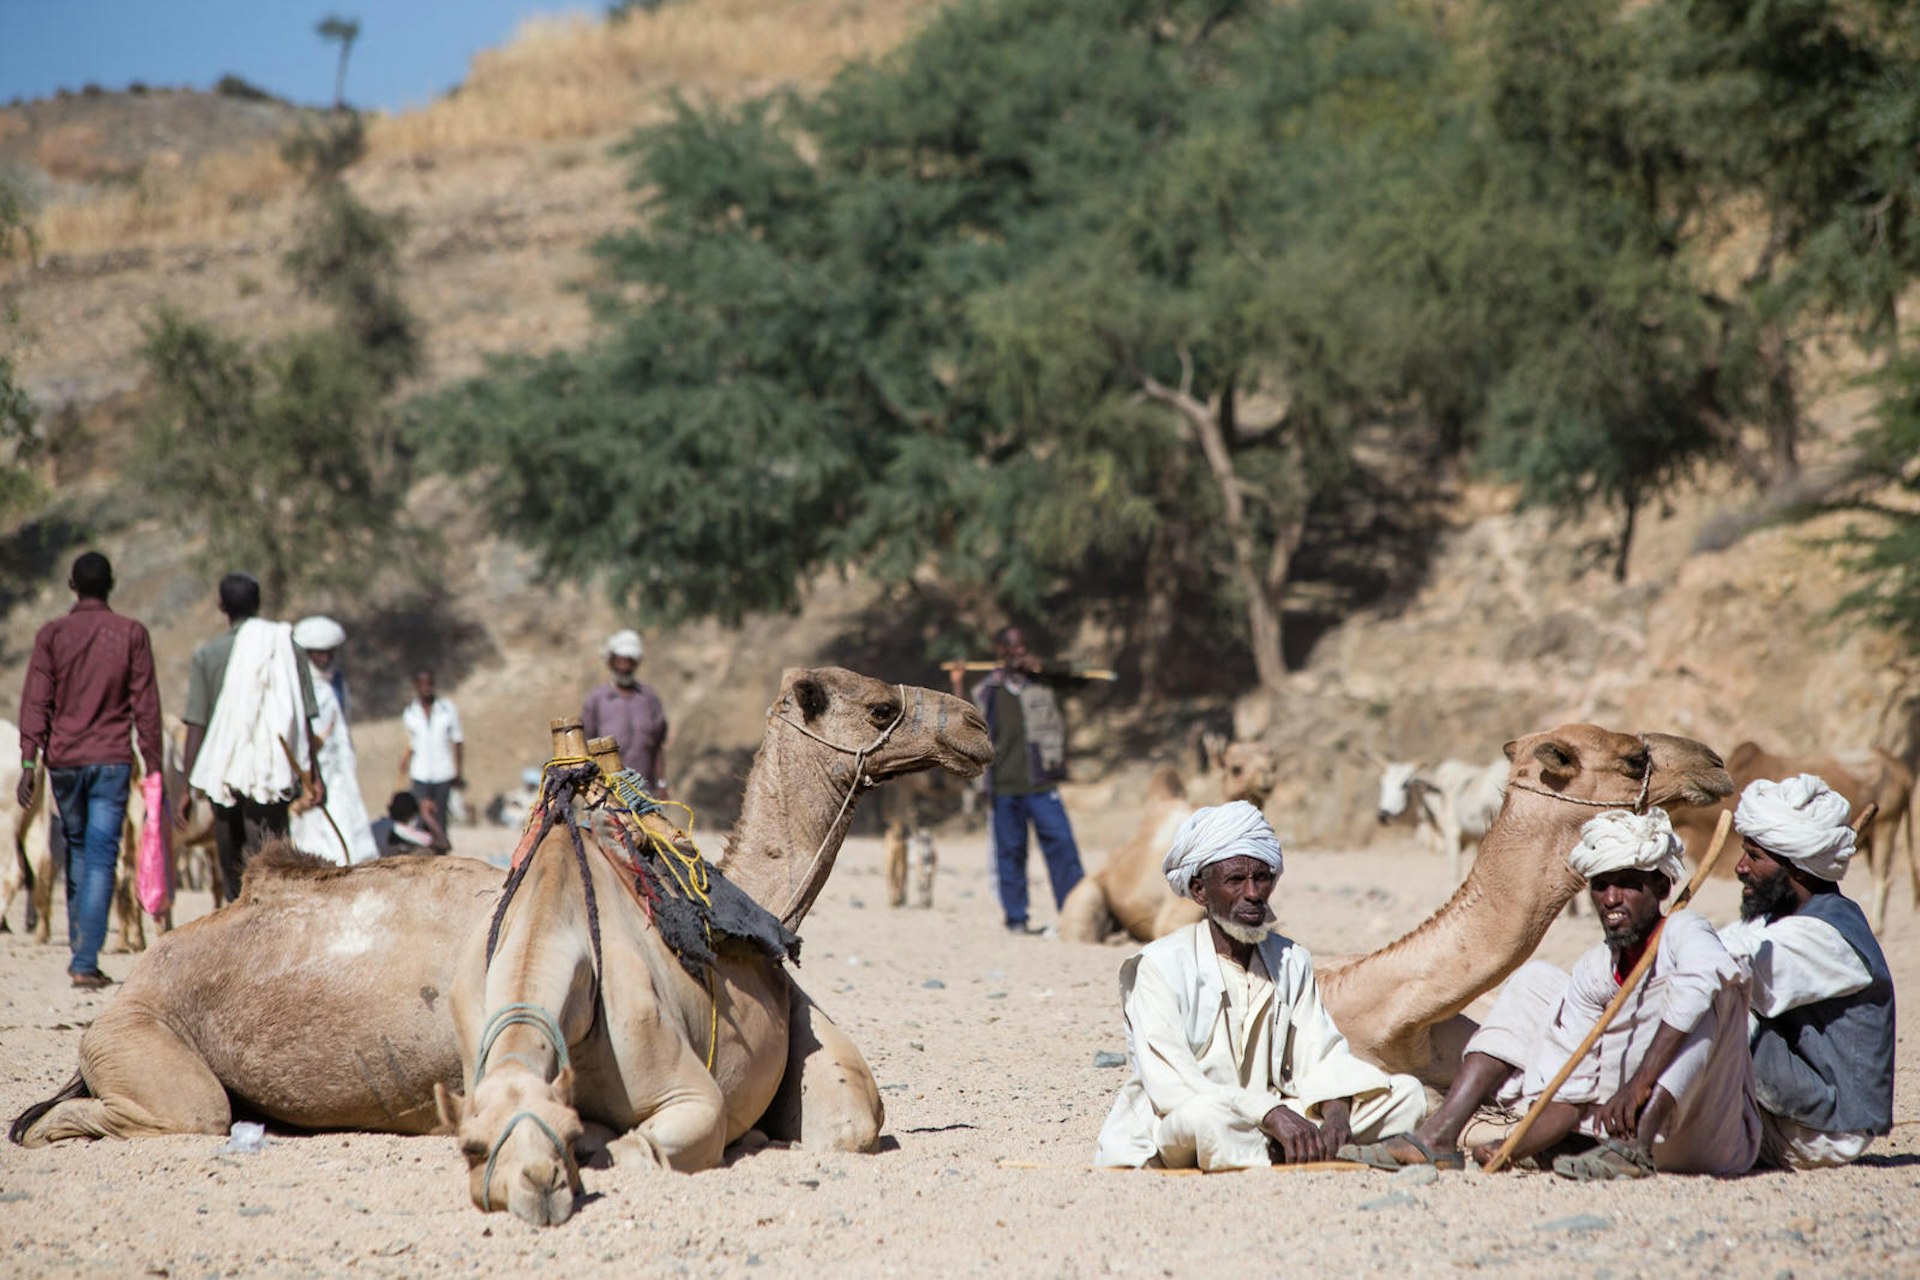 Three camels and three herders sit in a sandy, dry riverbed. The herders are garbed in white garments, with turbans. In the background are various herders, more camels and the odd cow 